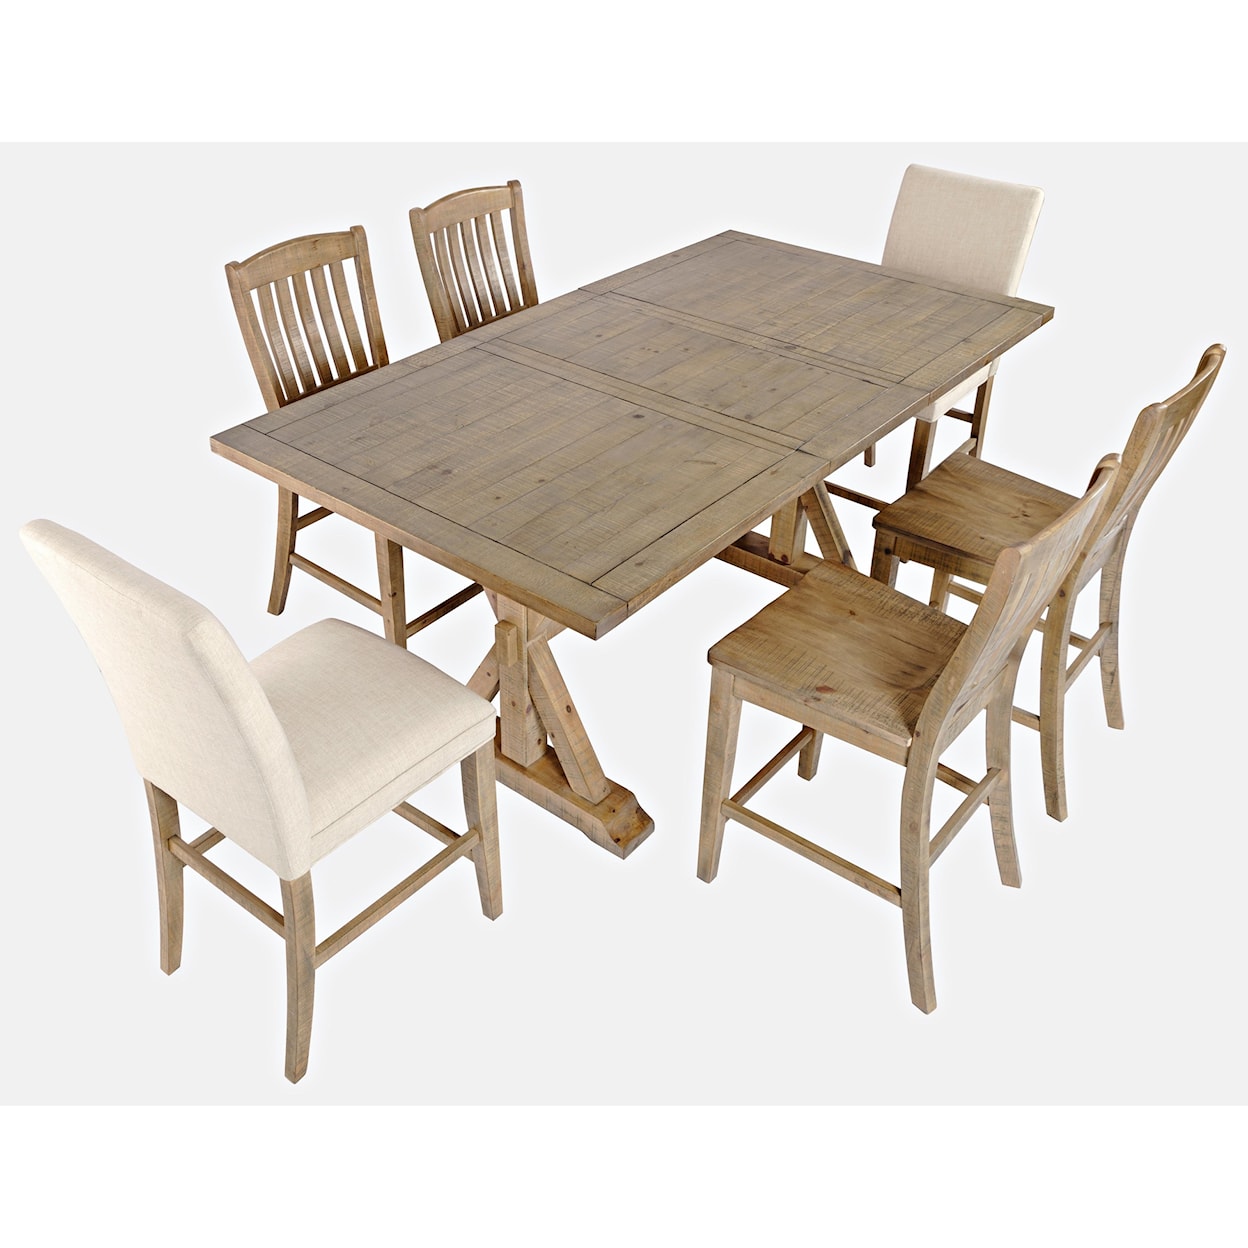 VFM Signature Carlyle Crossing 7-Piece Counter Table and Chair Set